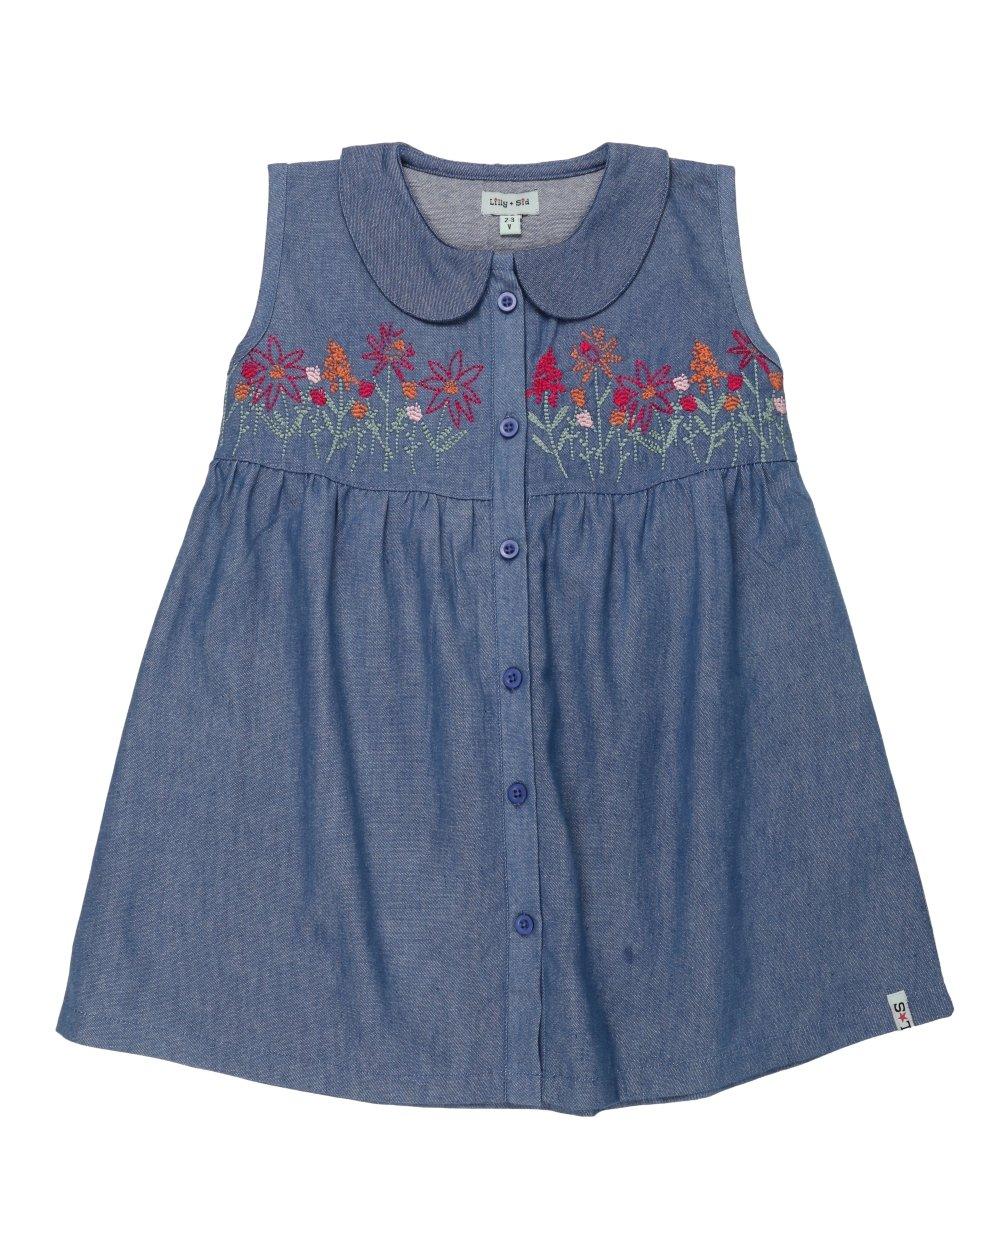 Floral Embroidered Chambray Collar Dress